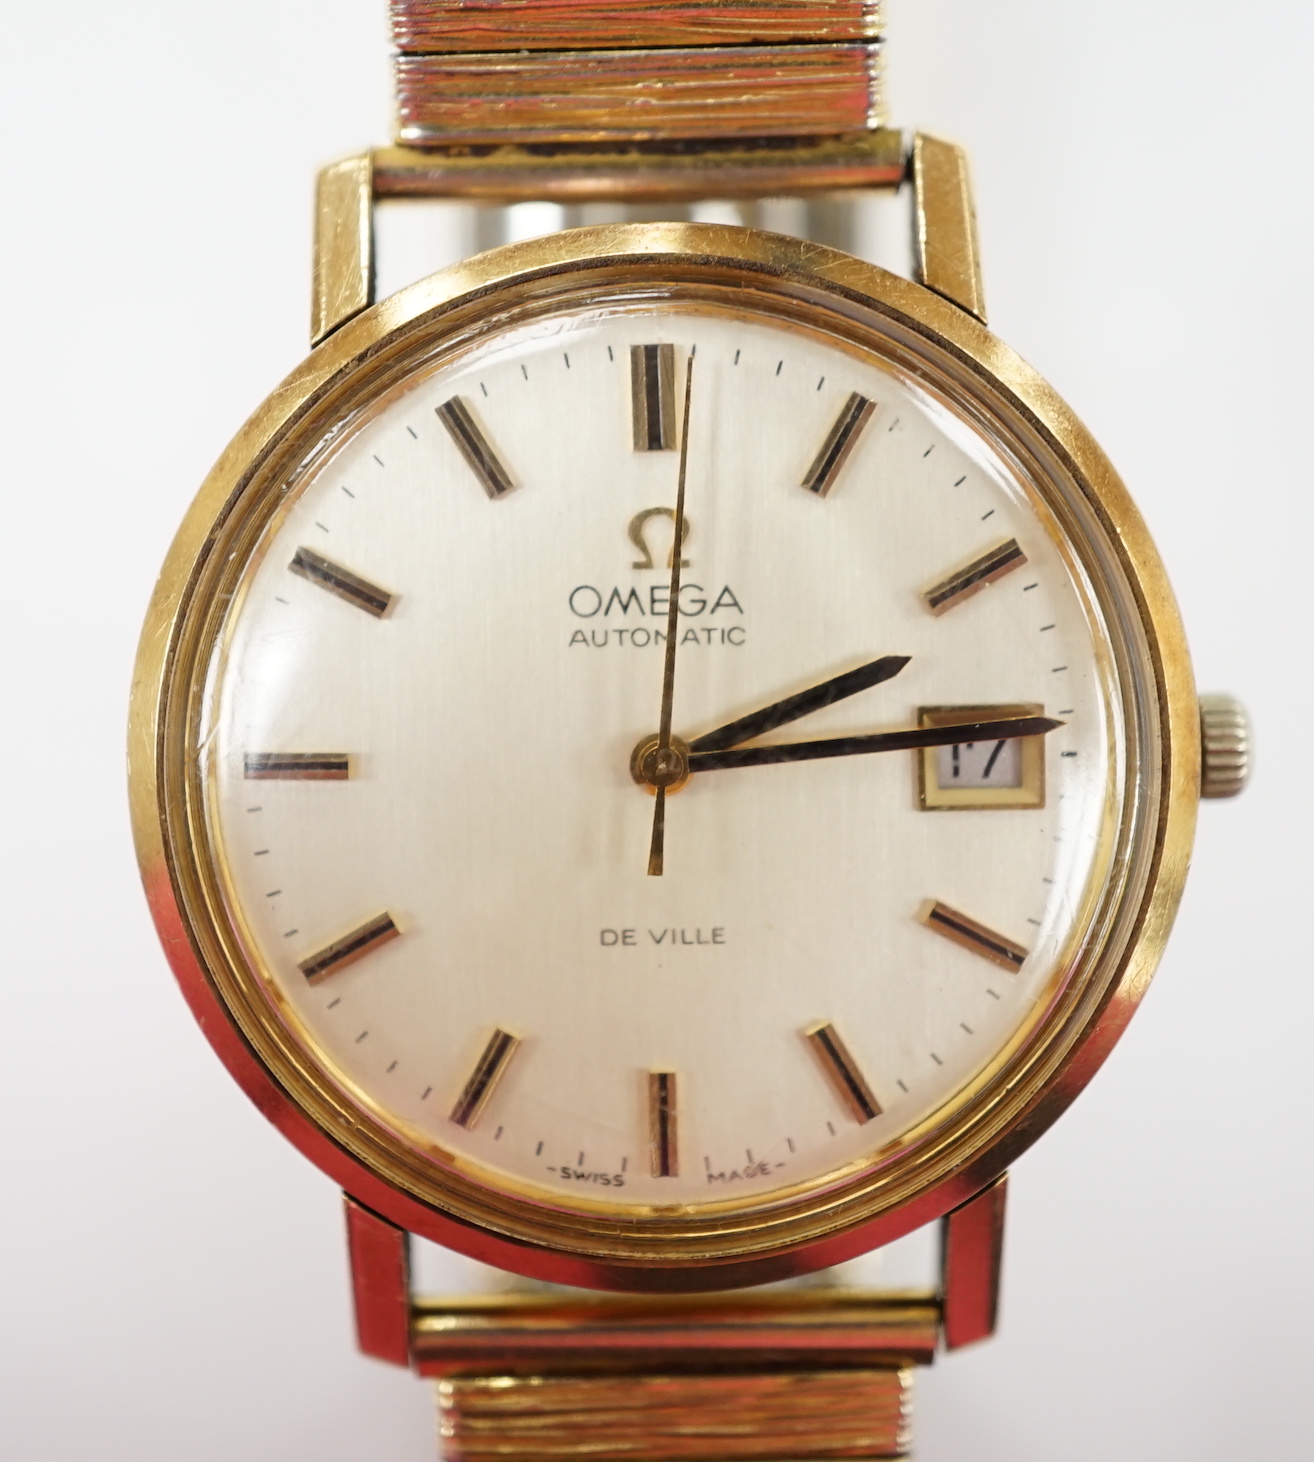 A gentleman's yellow metal Omega De Ville automatic wrist watch, with baton numerals and date aperture, case diameter 34mm, on an associated gold plated bracelet.